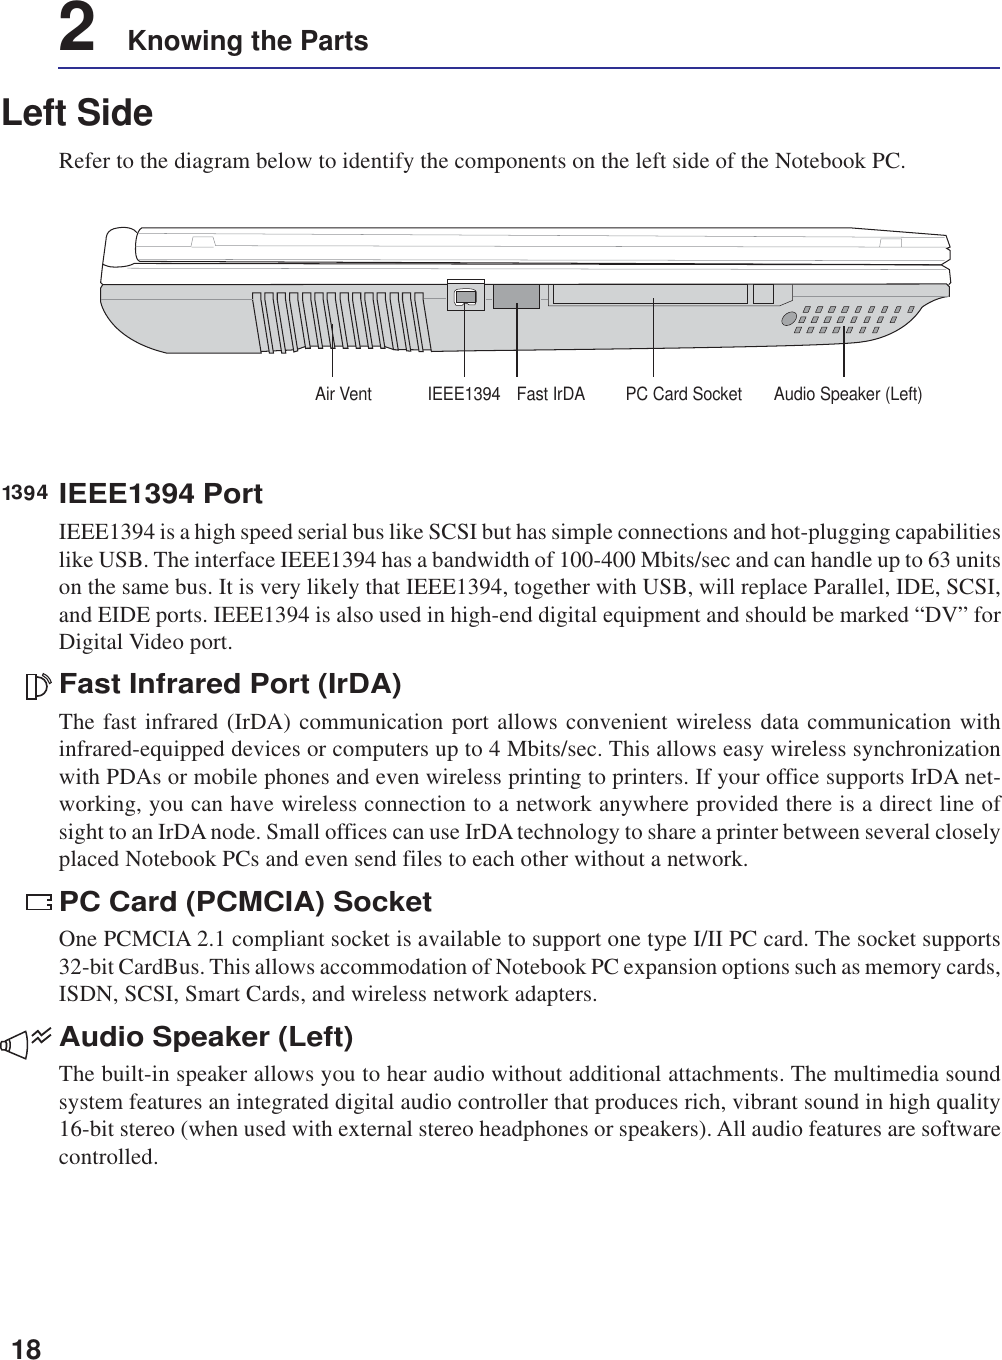 182    Knowing the PartsLeft SideRefer to the diagram below to identify the components on the left side of the Notebook PC.IEEE1394 PortIEEE1394 is a high speed serial bus like SCSI but has simple connections and hot-plugging capabilitieslike USB. The interface IEEE1394 has a bandwidth of 100-400 Mbits/sec and can handle up to 63 unitson the same bus. It is very likely that IEEE1394, together with USB, will replace Parallel, IDE, SCSI,and EIDE ports. IEEE1394 is also used in high-end digital equipment and should be marked “DV” forDigital Video port.Fast Infrared Port (IrDA)The fast infrared (IrDA) communication port allows convenient wireless data communication withinfrared-equipped devices or computers up to 4 Mbits/sec. This allows easy wireless synchronizationwith PDAs or mobile phones and even wireless printing to printers. If your office supports IrDA net-working, you can have wireless connection to a network anywhere provided there is a direct line ofsight to an IrDA node. Small offices can use IrDA technology to share a printer between several closelyplaced Notebook PCs and even send files to each other without a network.PC Card (PCMCIA) SocketOne PCMCIA 2.1 compliant socket is available to support one type I/II PC card. The socket supports32-bit CardBus. This allows accommodation of Notebook PC expansion options such as memory cards,ISDN, SCSI, Smart Cards, and wireless network adapters.Audio Speaker (Left)The built-in speaker allows you to hear audio without additional attachments. The multimedia soundsystem features an integrated digital audio controller that produces rich, vibrant sound in high quality16-bit stereo (when used with external stereo headphones or speakers). All audio features are softwarecontrolled.1394Audio Speaker (Left)Fast IrDAAir Vent IEEE1394 PC Card Socket